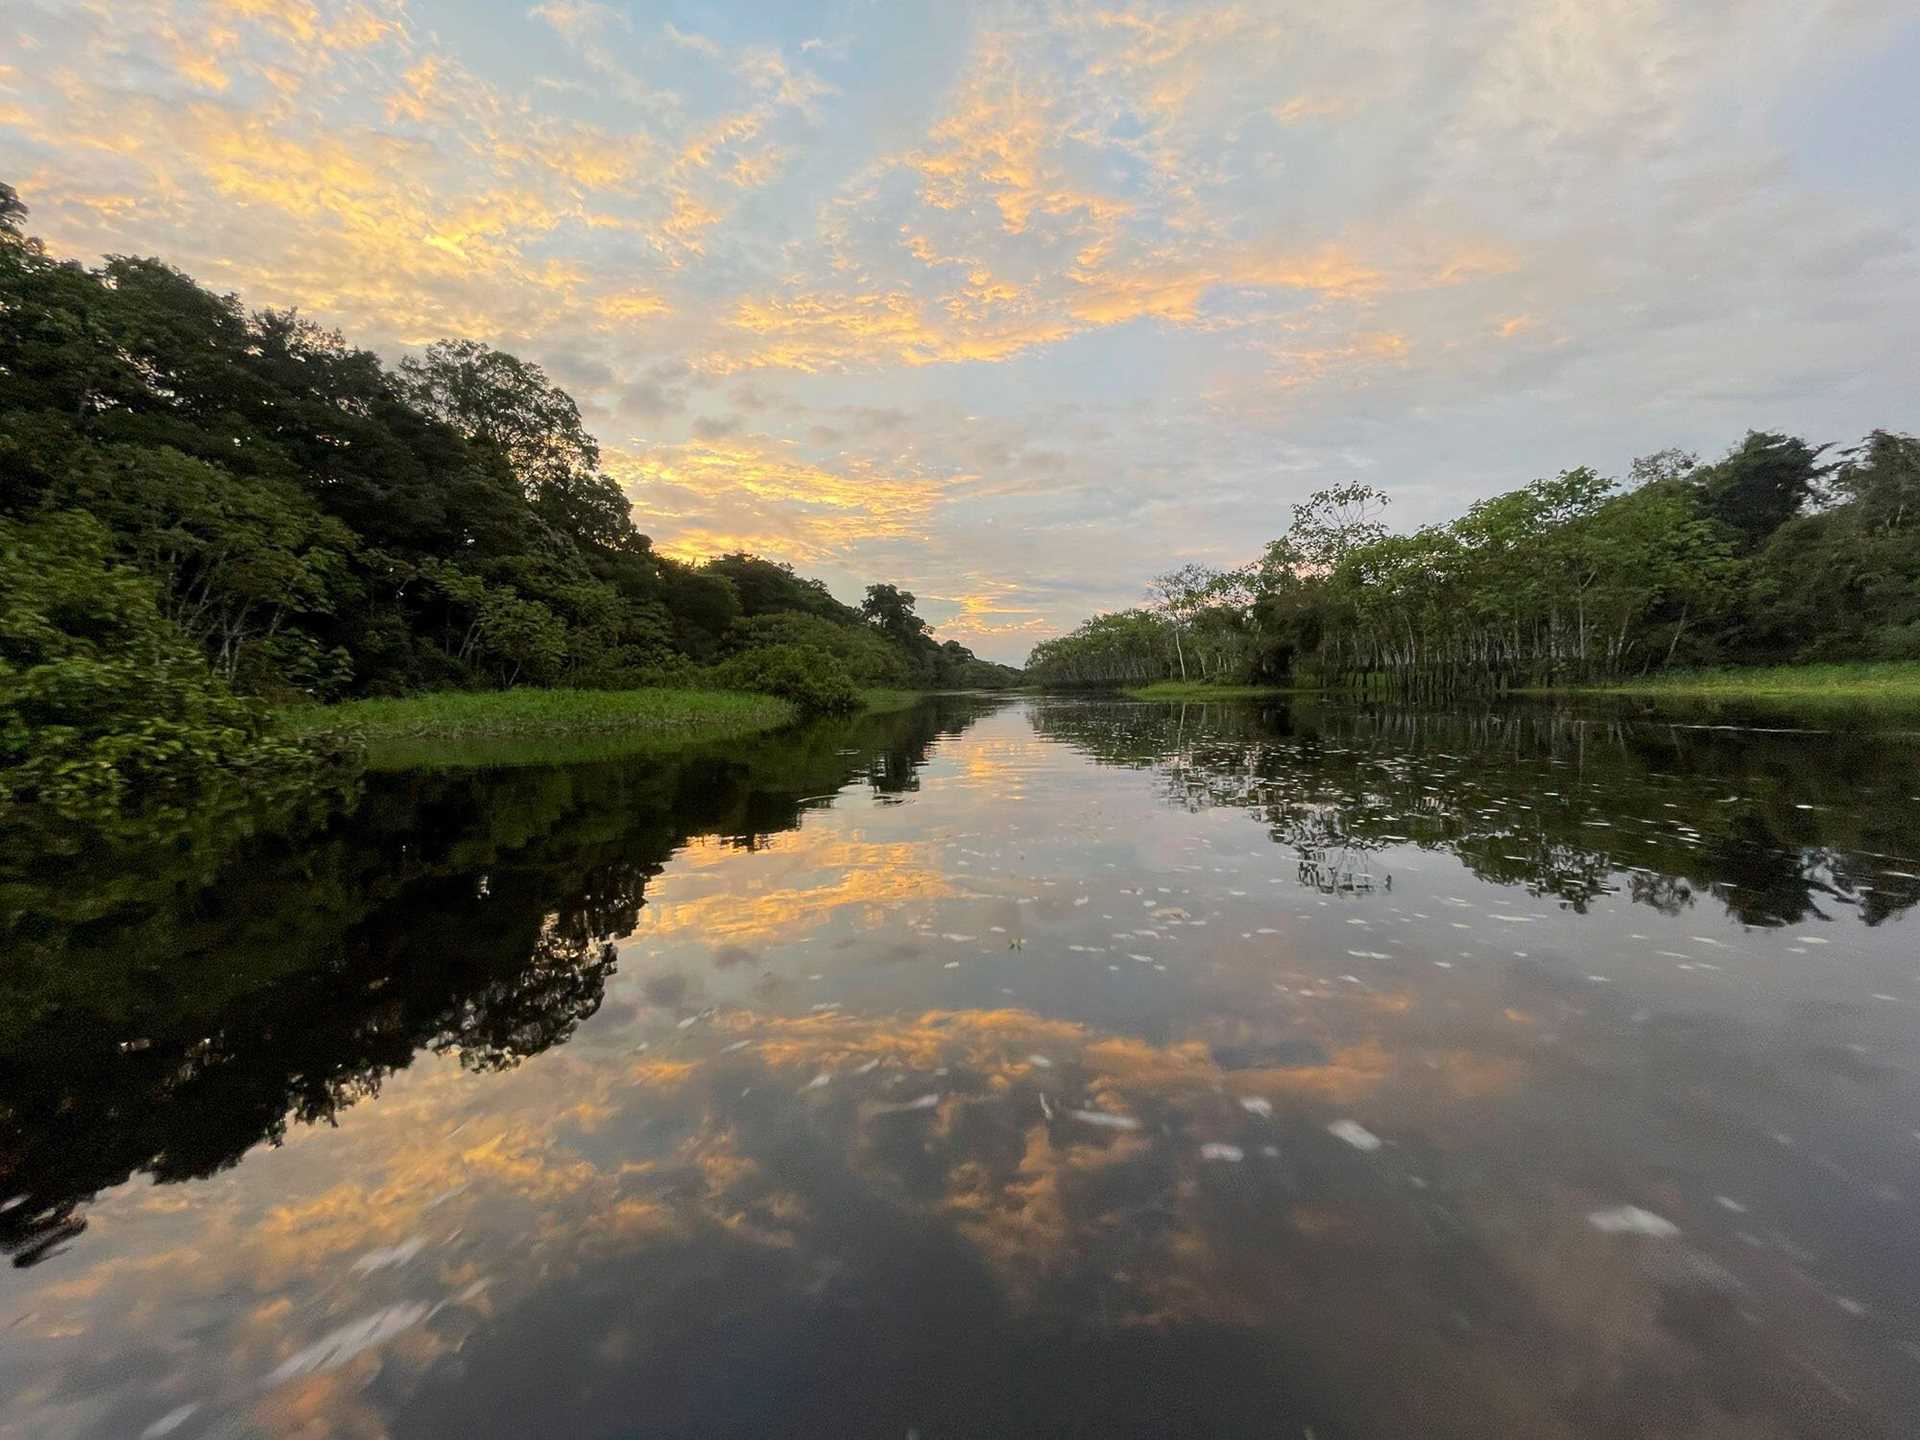 the amazon river reflecting the sky at sunset